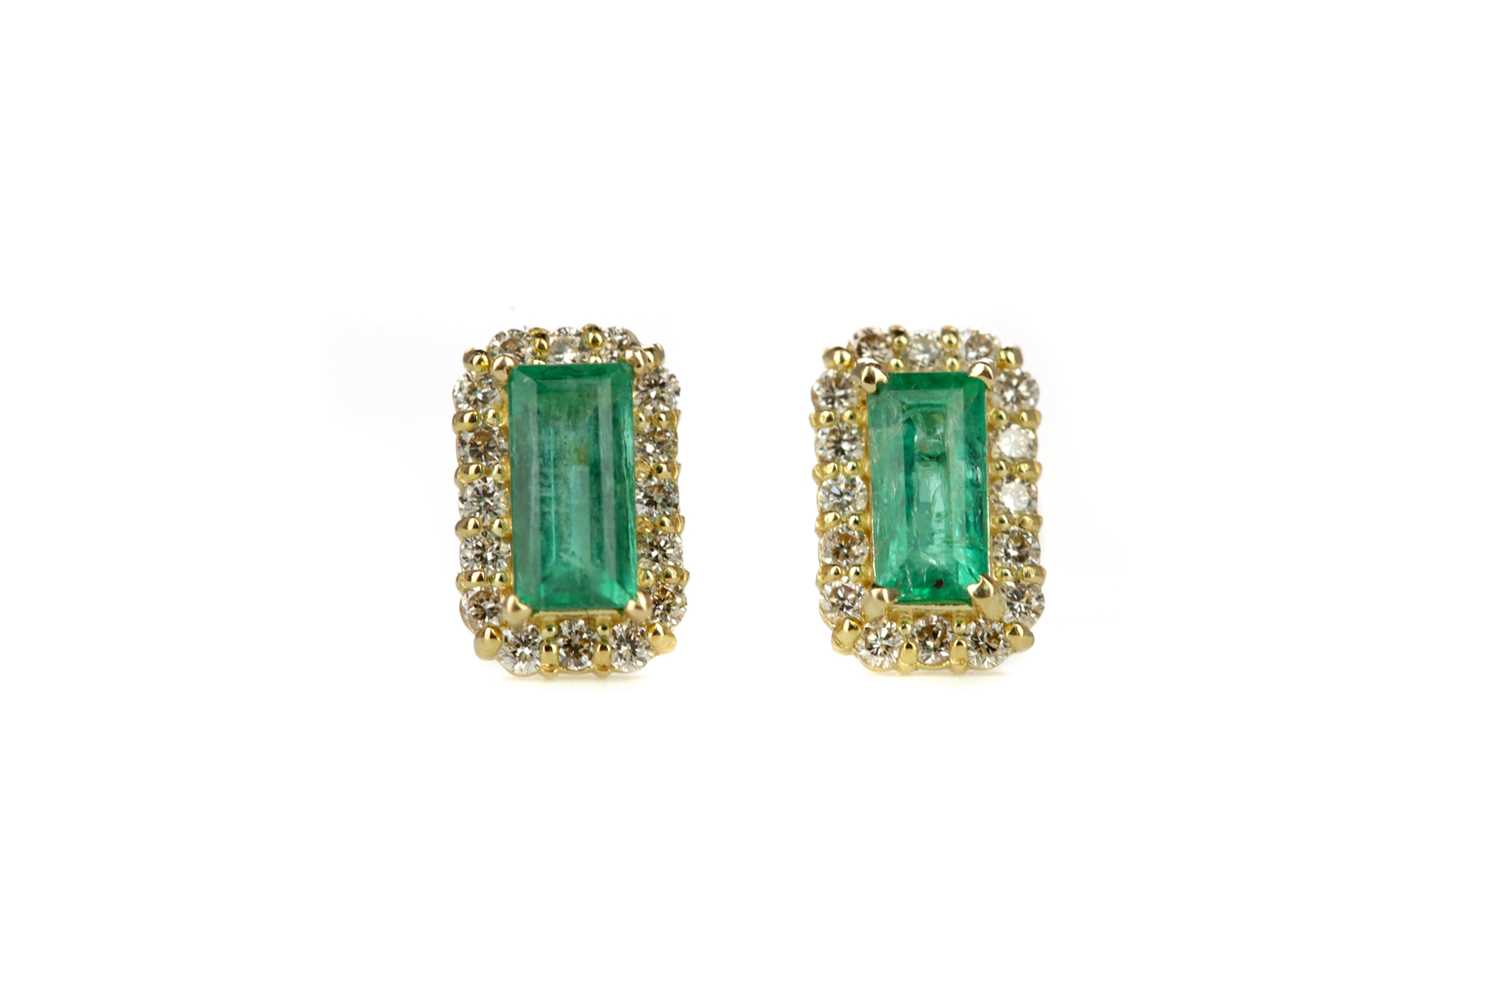 Lot 430 - A PAIR OF EMERALD AND DIAMOND EARRINGS